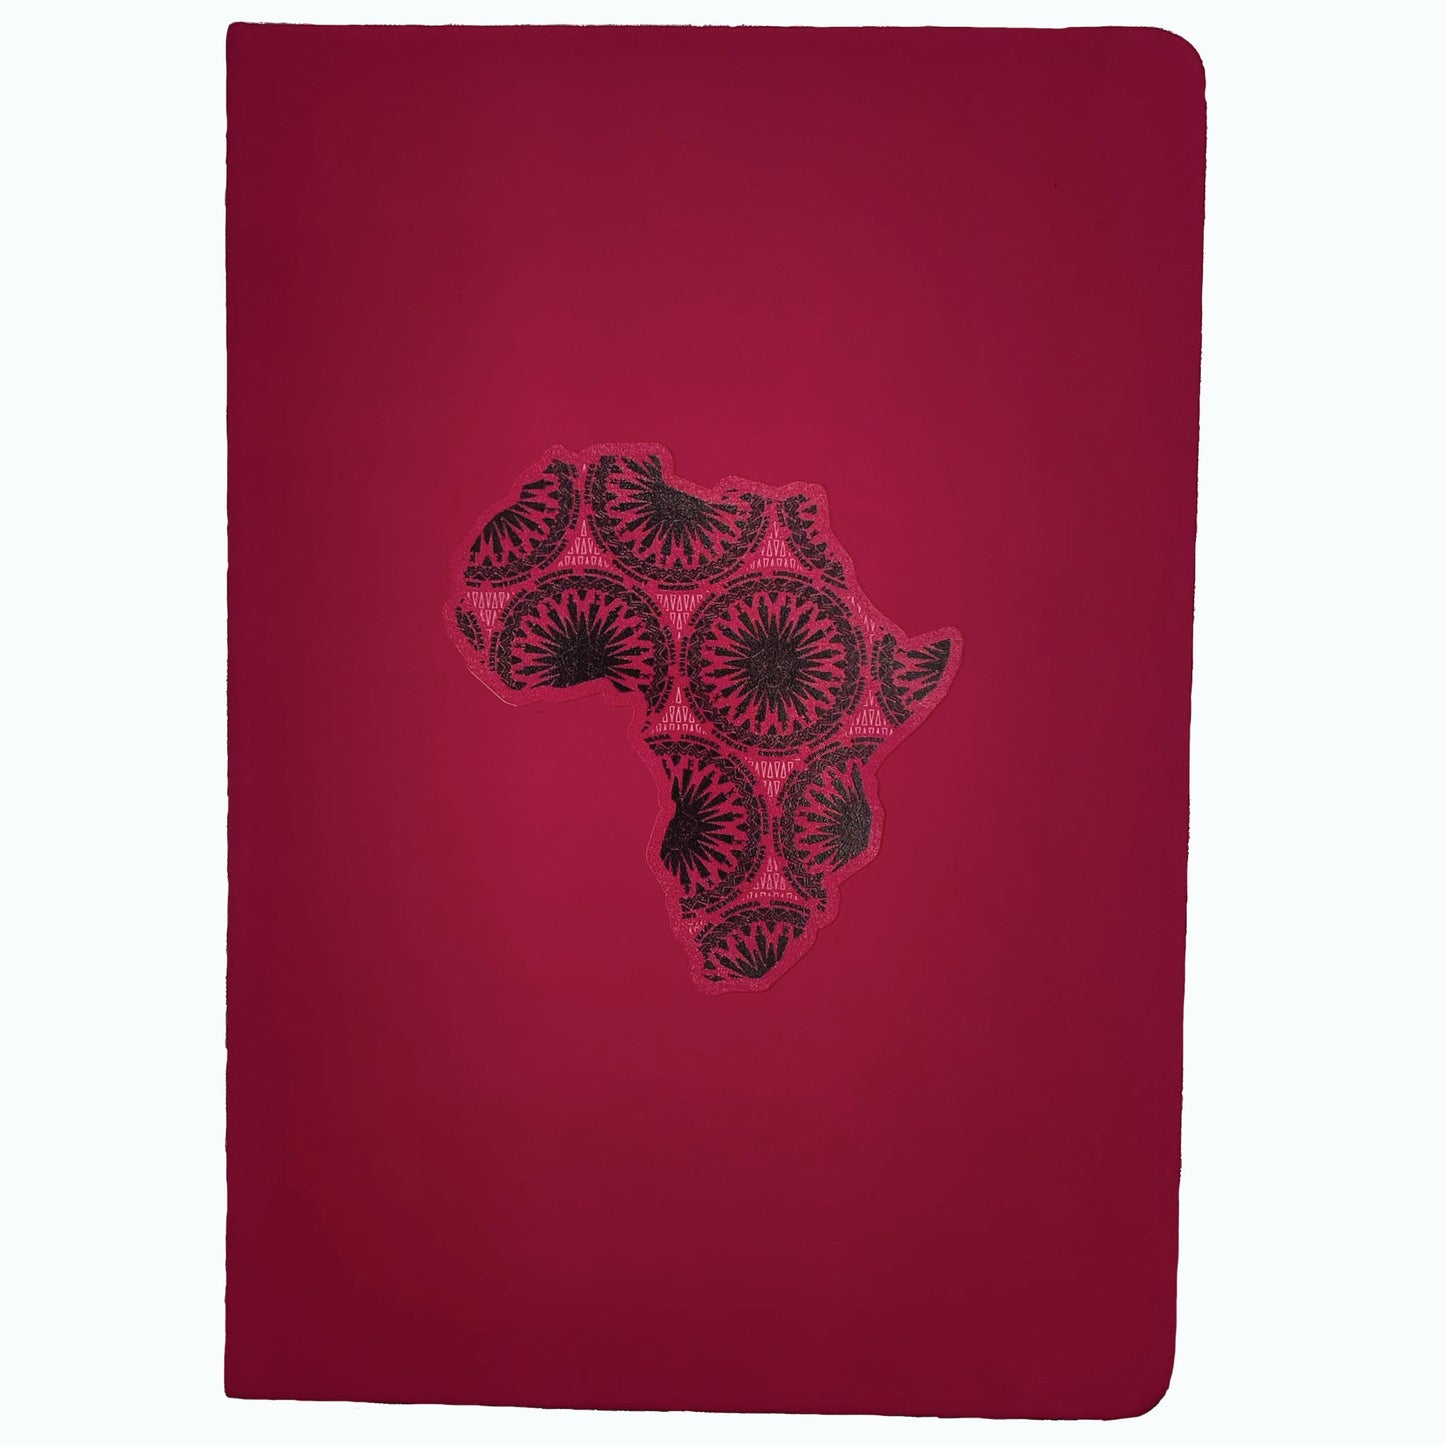 Africa Map Notebooks